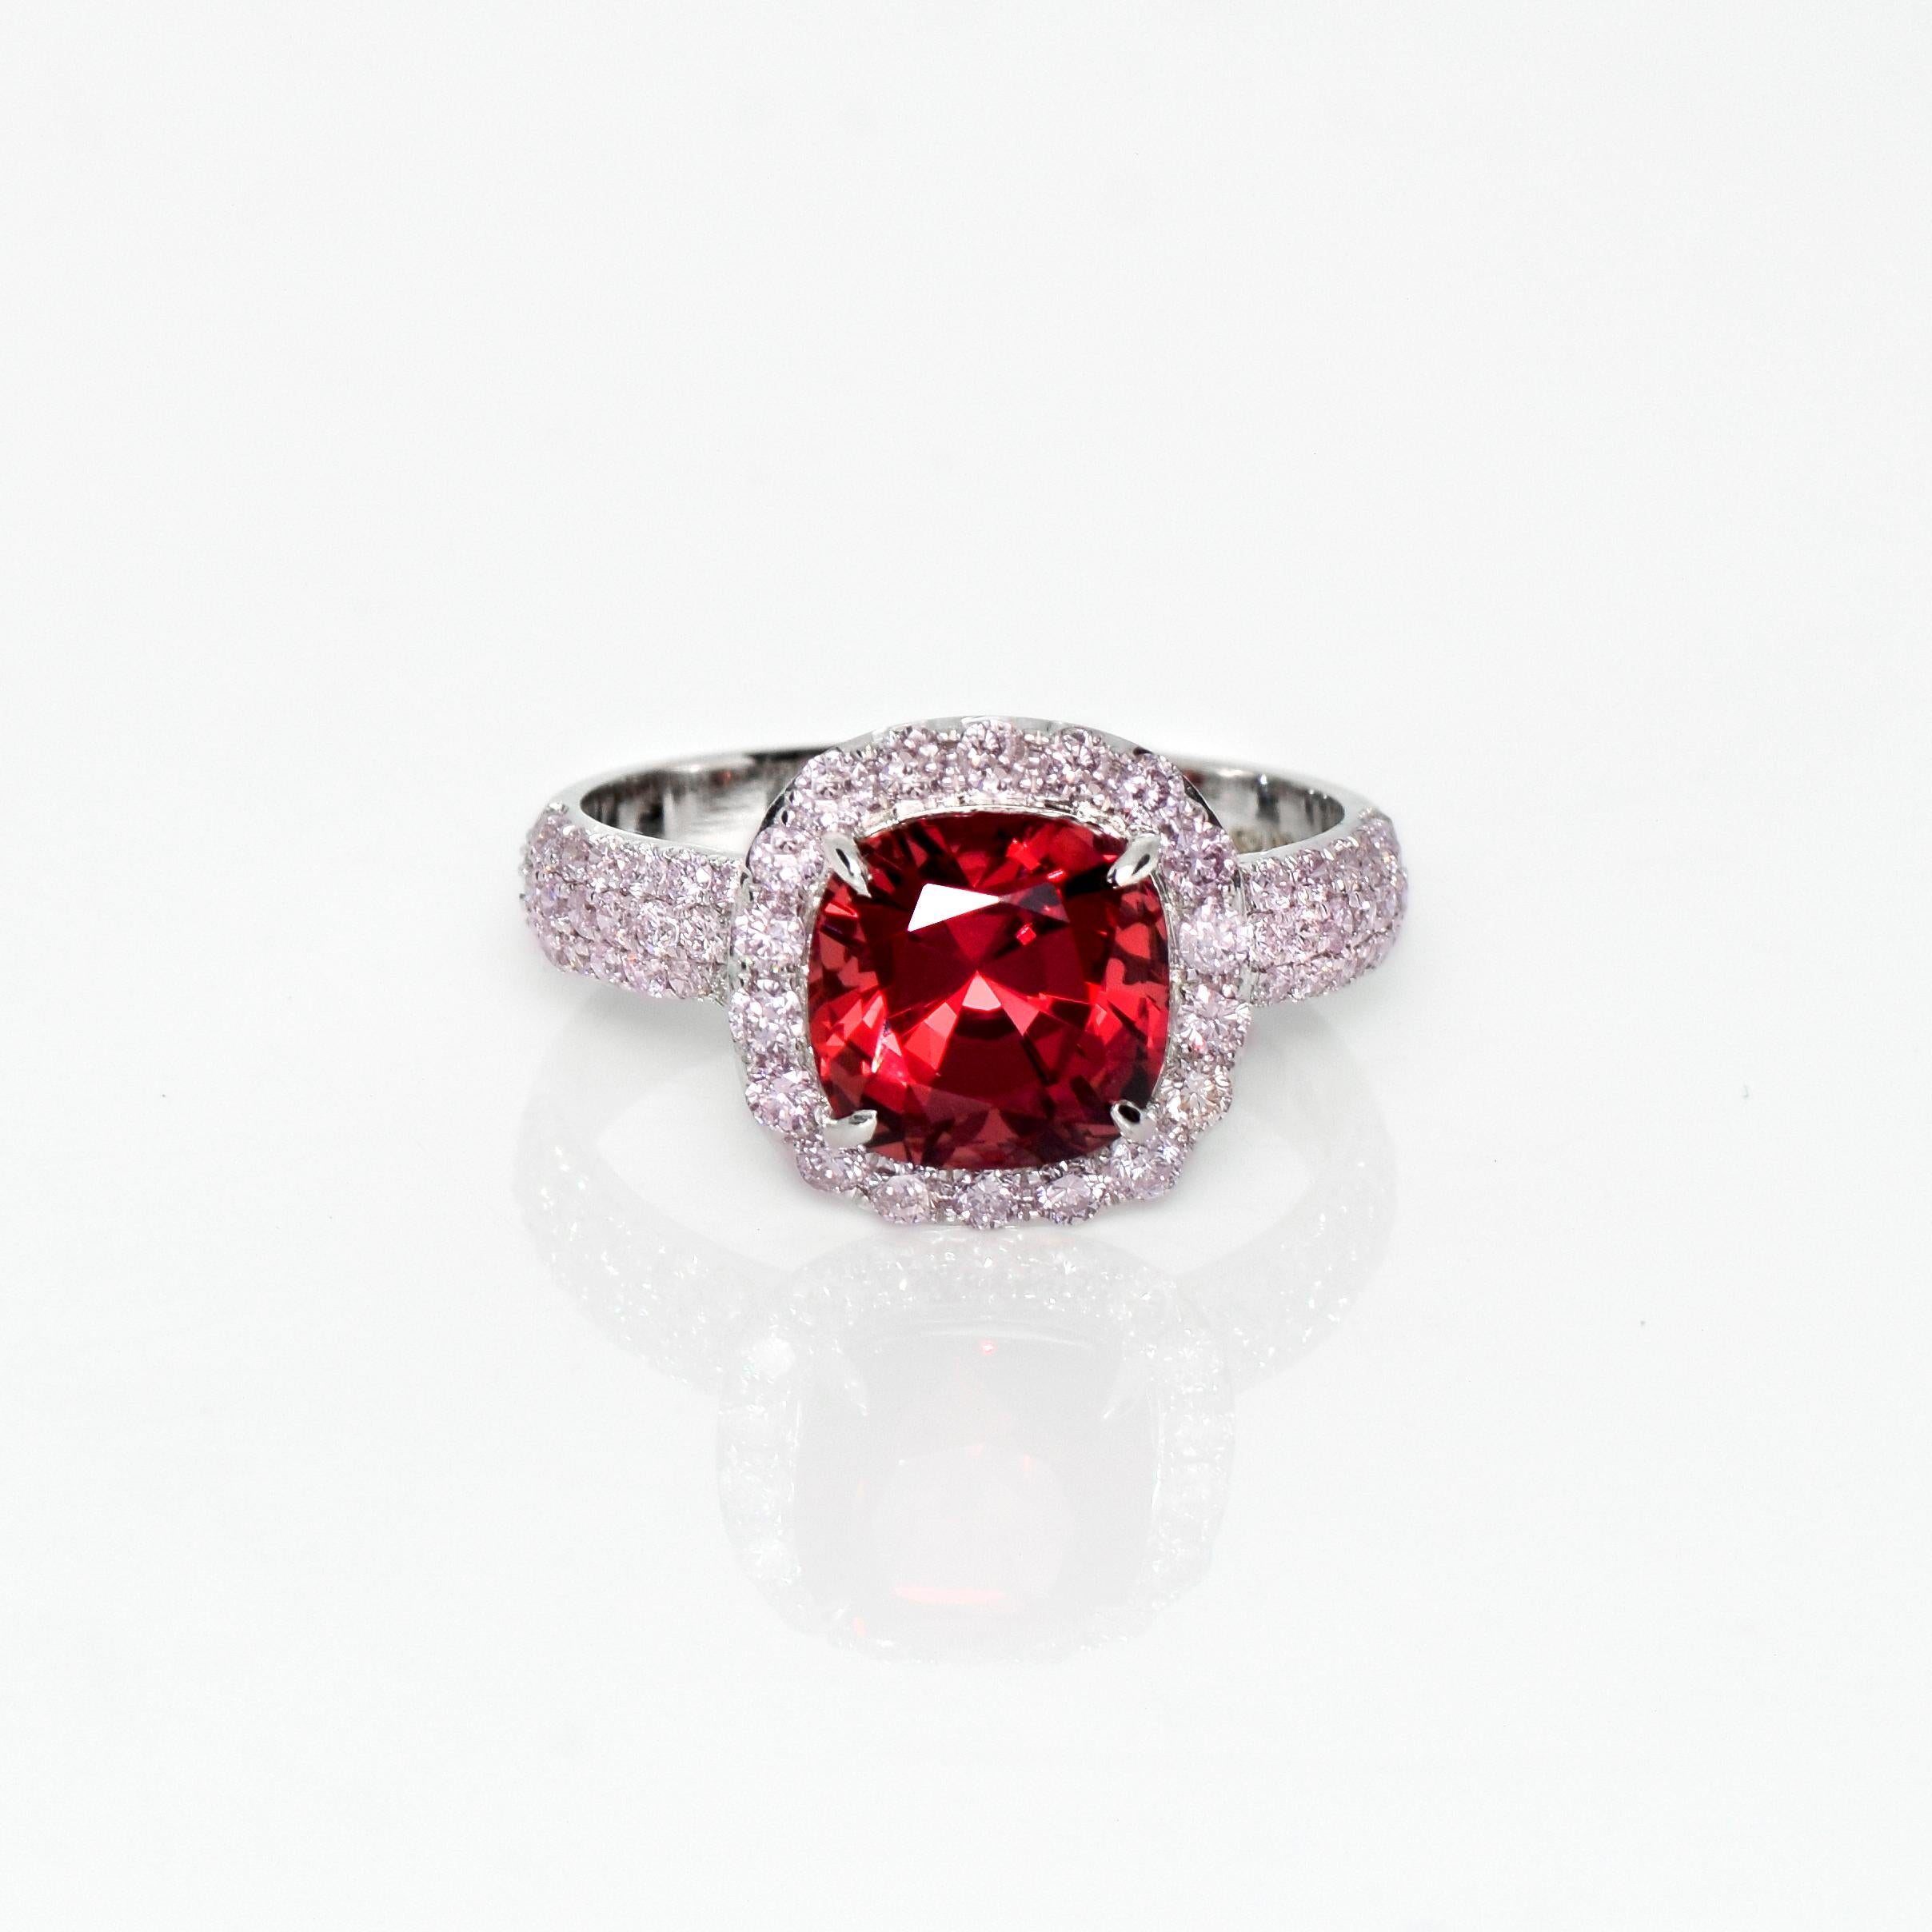 *IGI 18K 3.09 Ct Red Spinel&Pink Diamonds Antique Engagement Ring*

IGI-certified natural untreated fancy red, a cushion-shaped spinel weighing 3.09 ct set on 18K white gold luxury table pave' design band with natural pink diamonds weighing 0.87 ct.